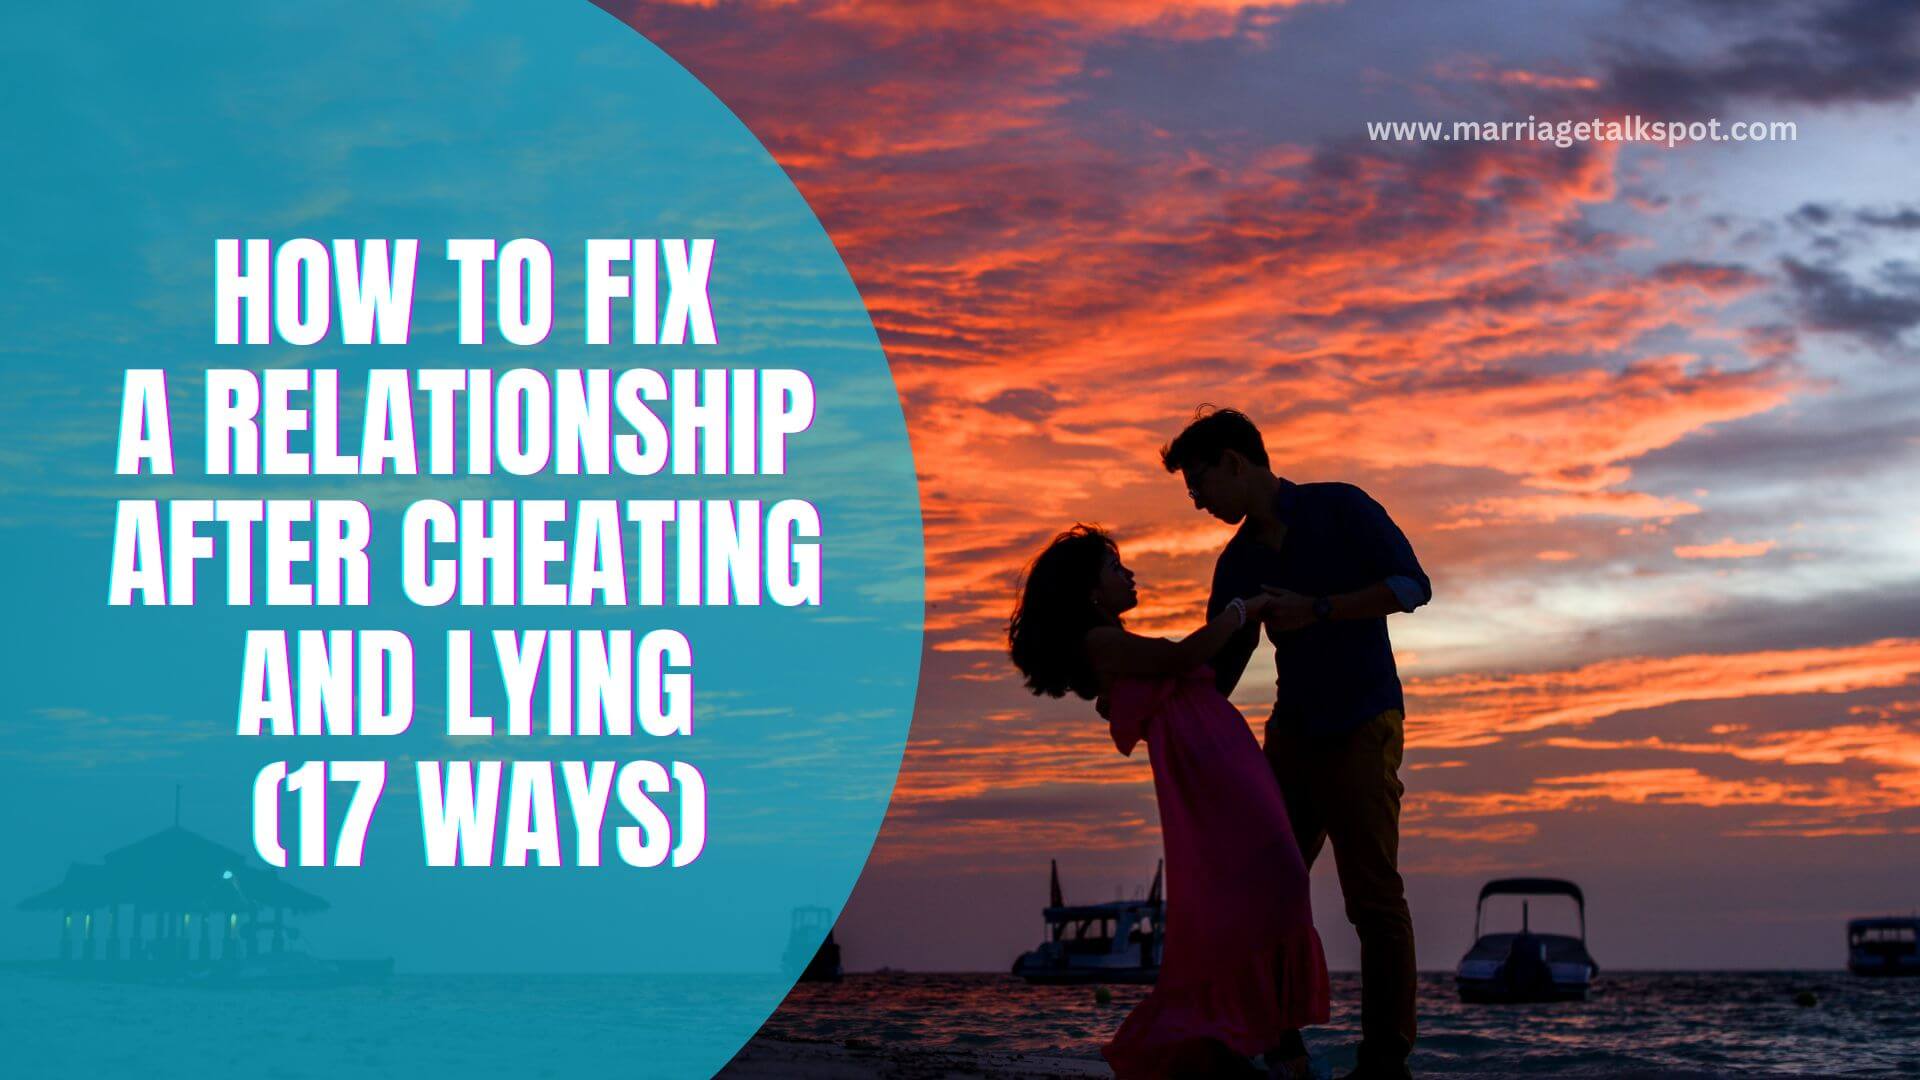 HOW TO FIX A RELATIONSHIP AFTER CHEATING AND LYING (17 WAYS)